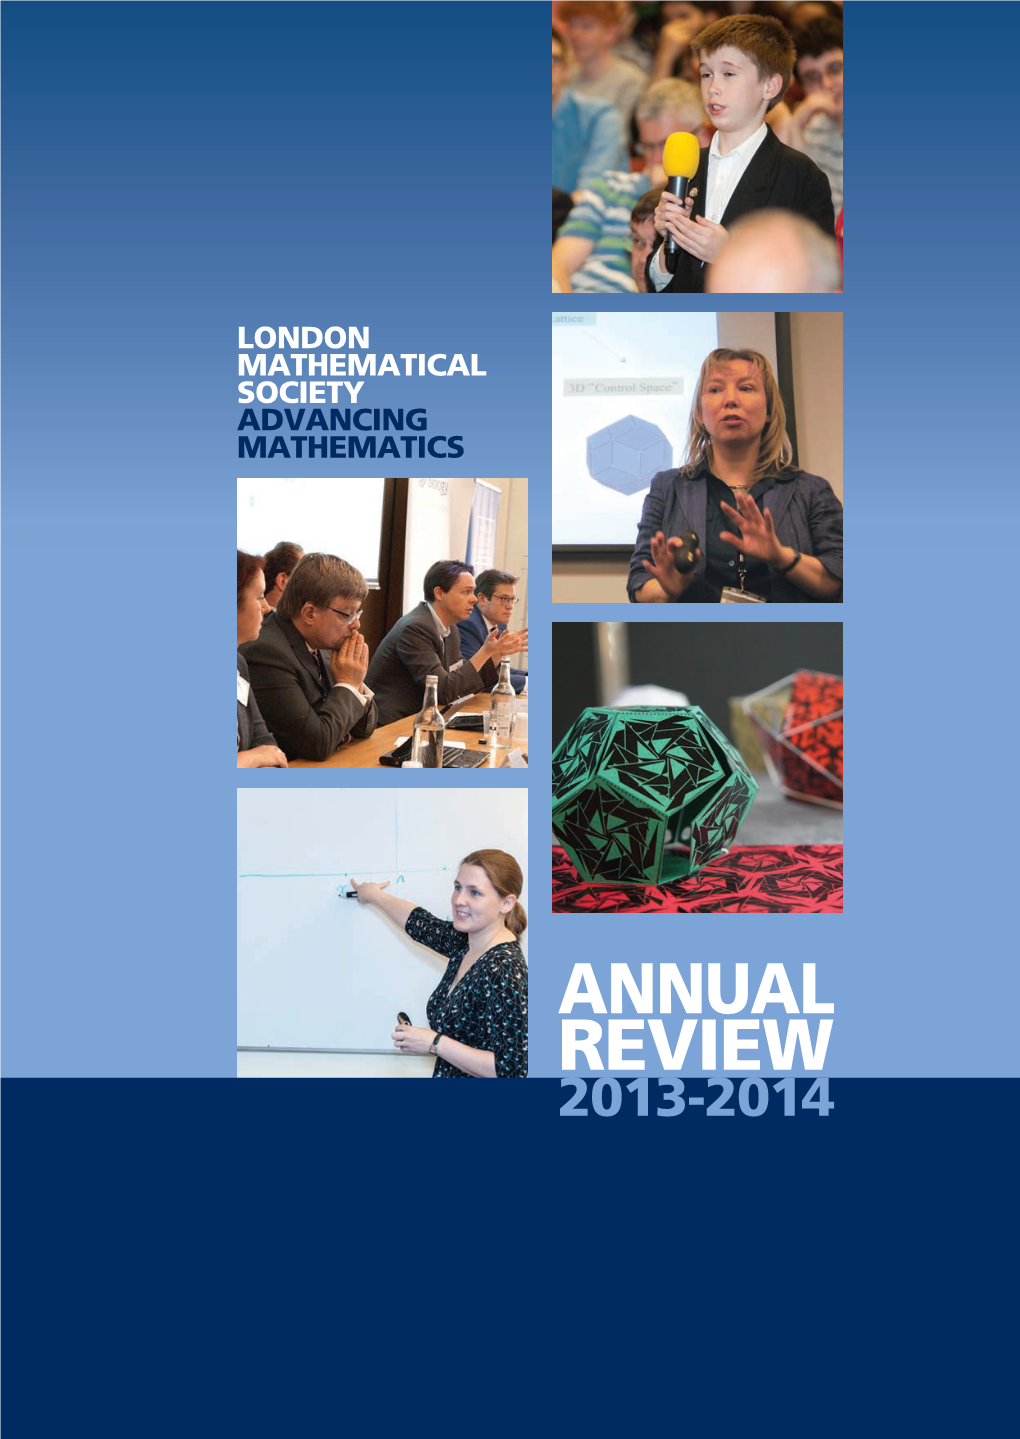 LMS Annual Review 2013-2014